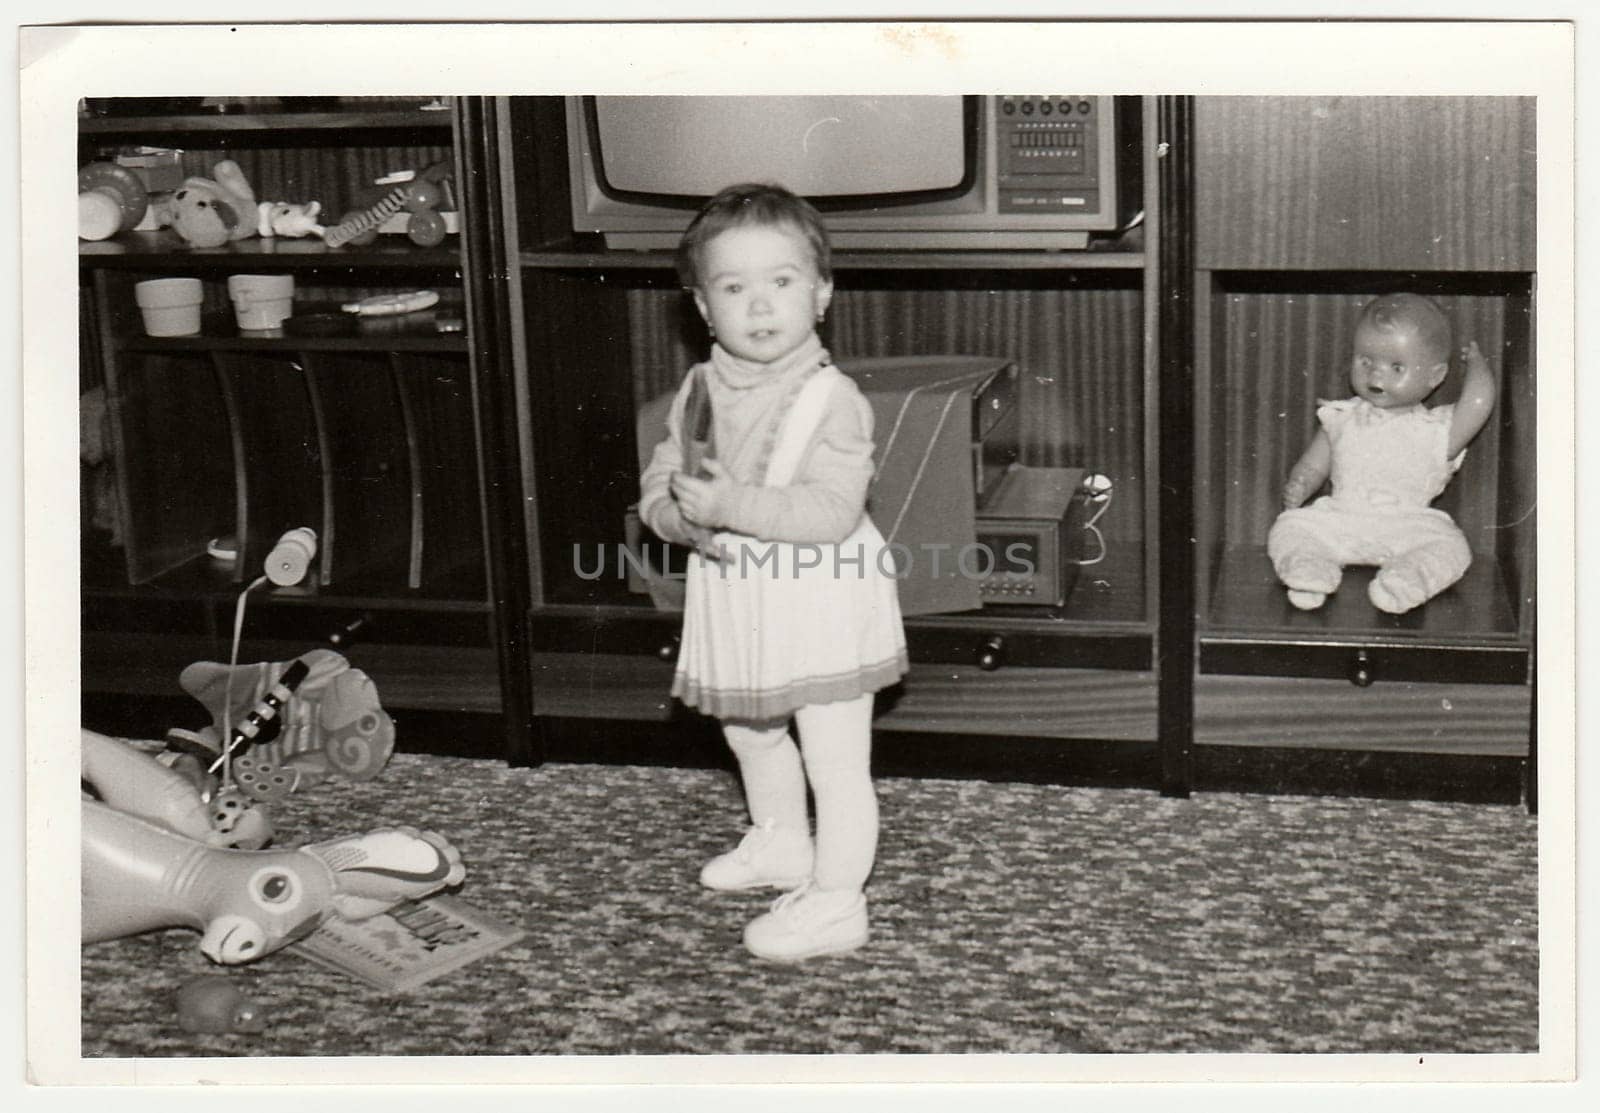 THE CZECHOSLOVAK SOCIALIST REPUBLIC - CIRCA 1970s: Retro photo shows child, girl who plays with toy. Black and white vintage photography.